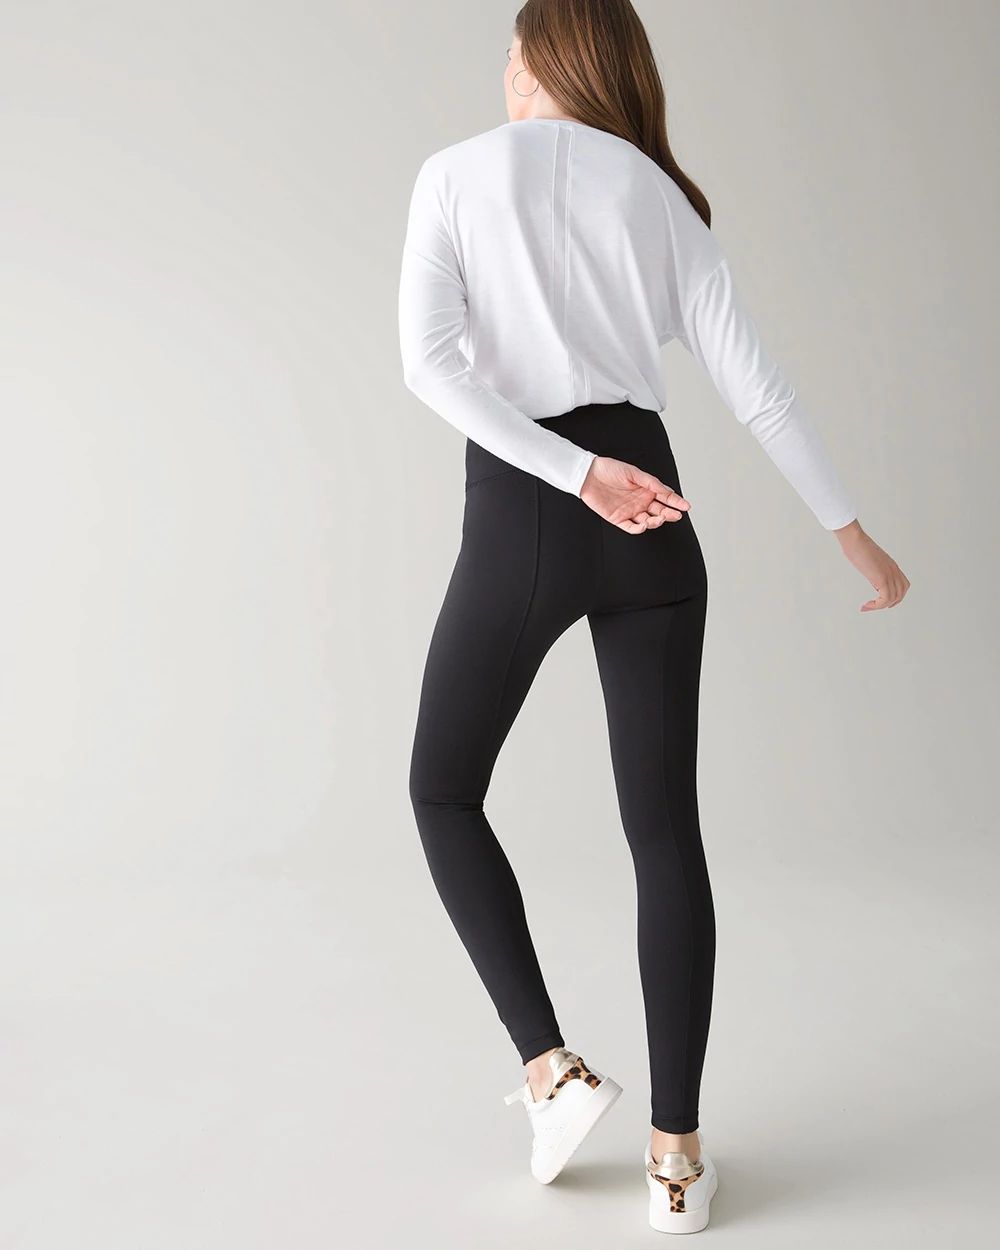 Scuba Knit WHBM Runway Leggings click to view larger image.